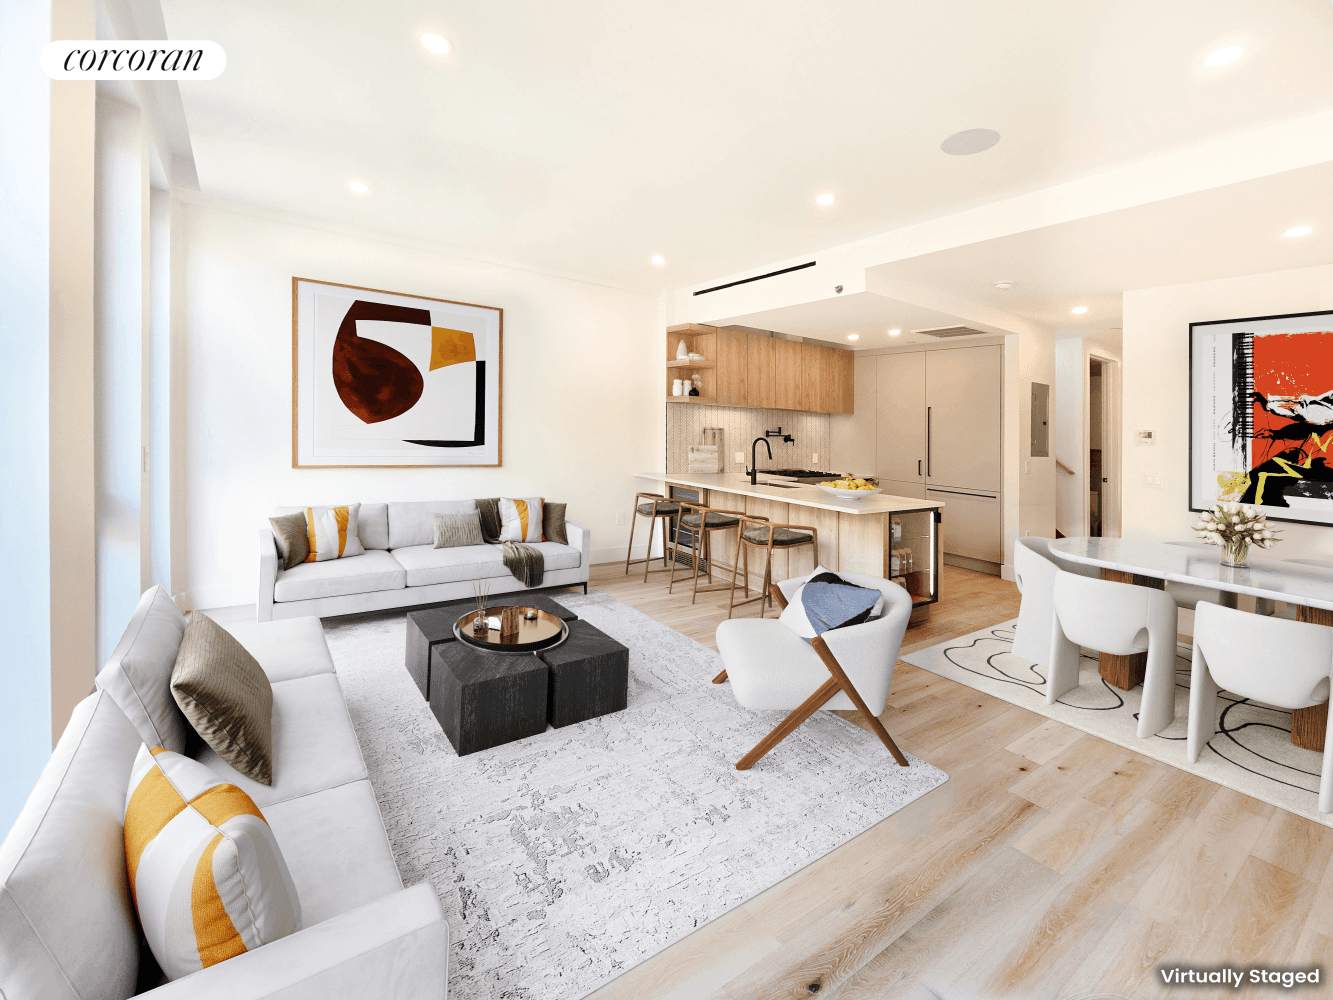 Presenting 232 S 2nd Street A thoughtfully conceived 4 unit smart home boutique condominium in Williamsburg's Southside !